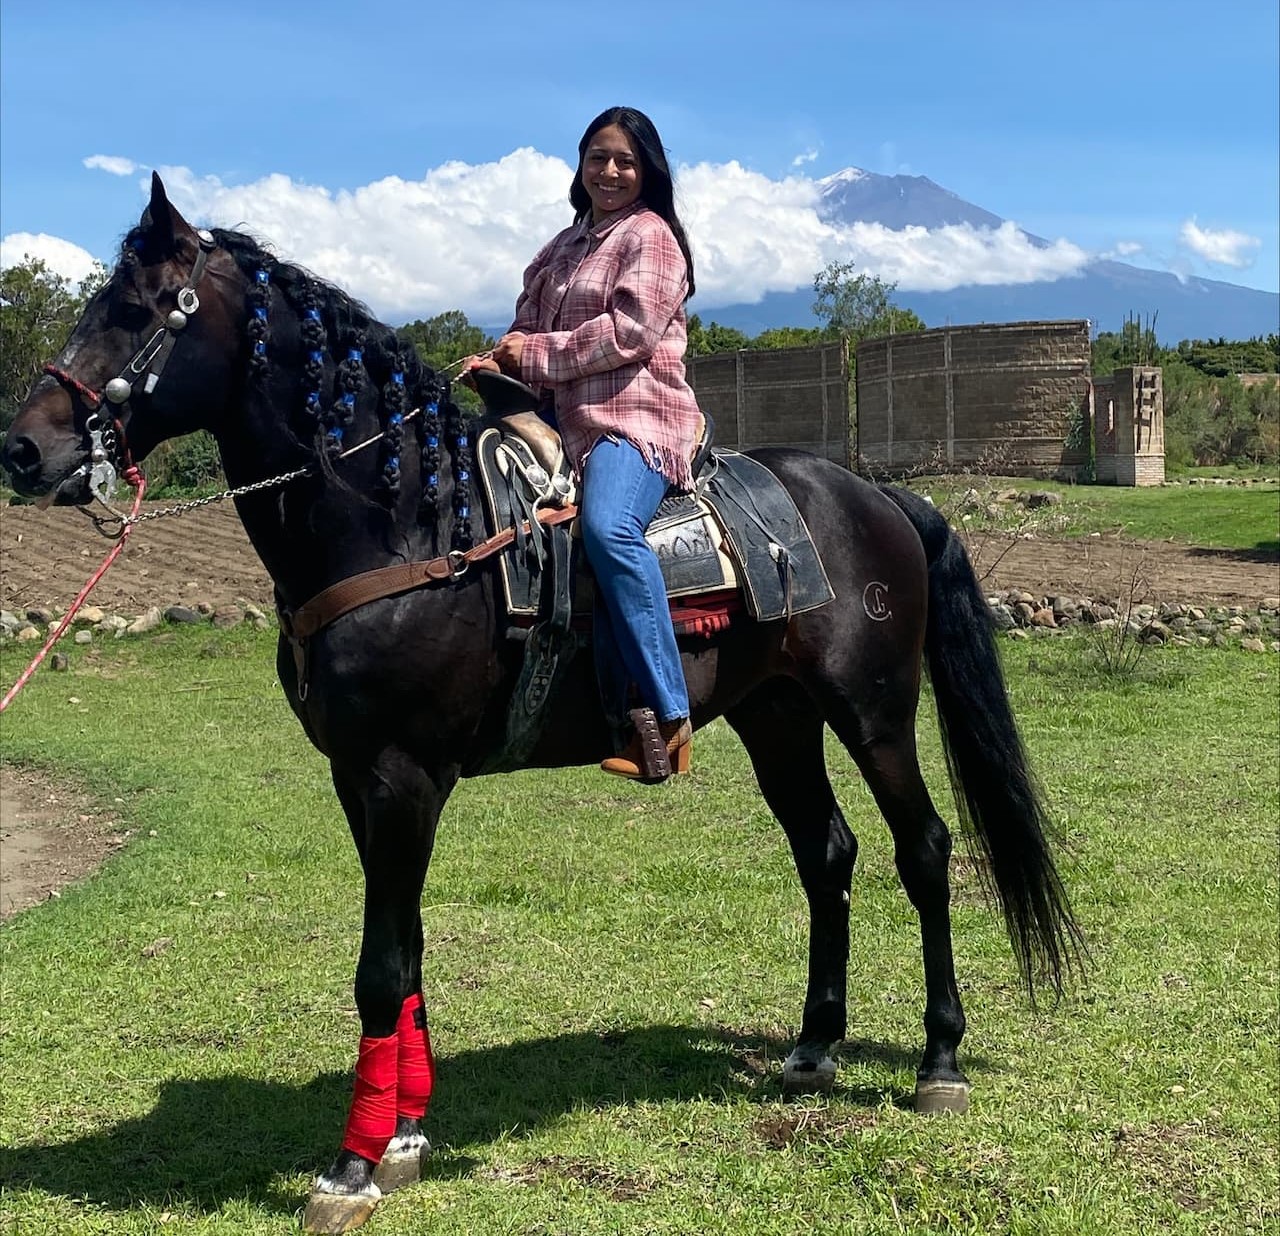 Yasmin Ramirez sitting atop a black horse, in front of clods adn mountainaous background in Mexico. 